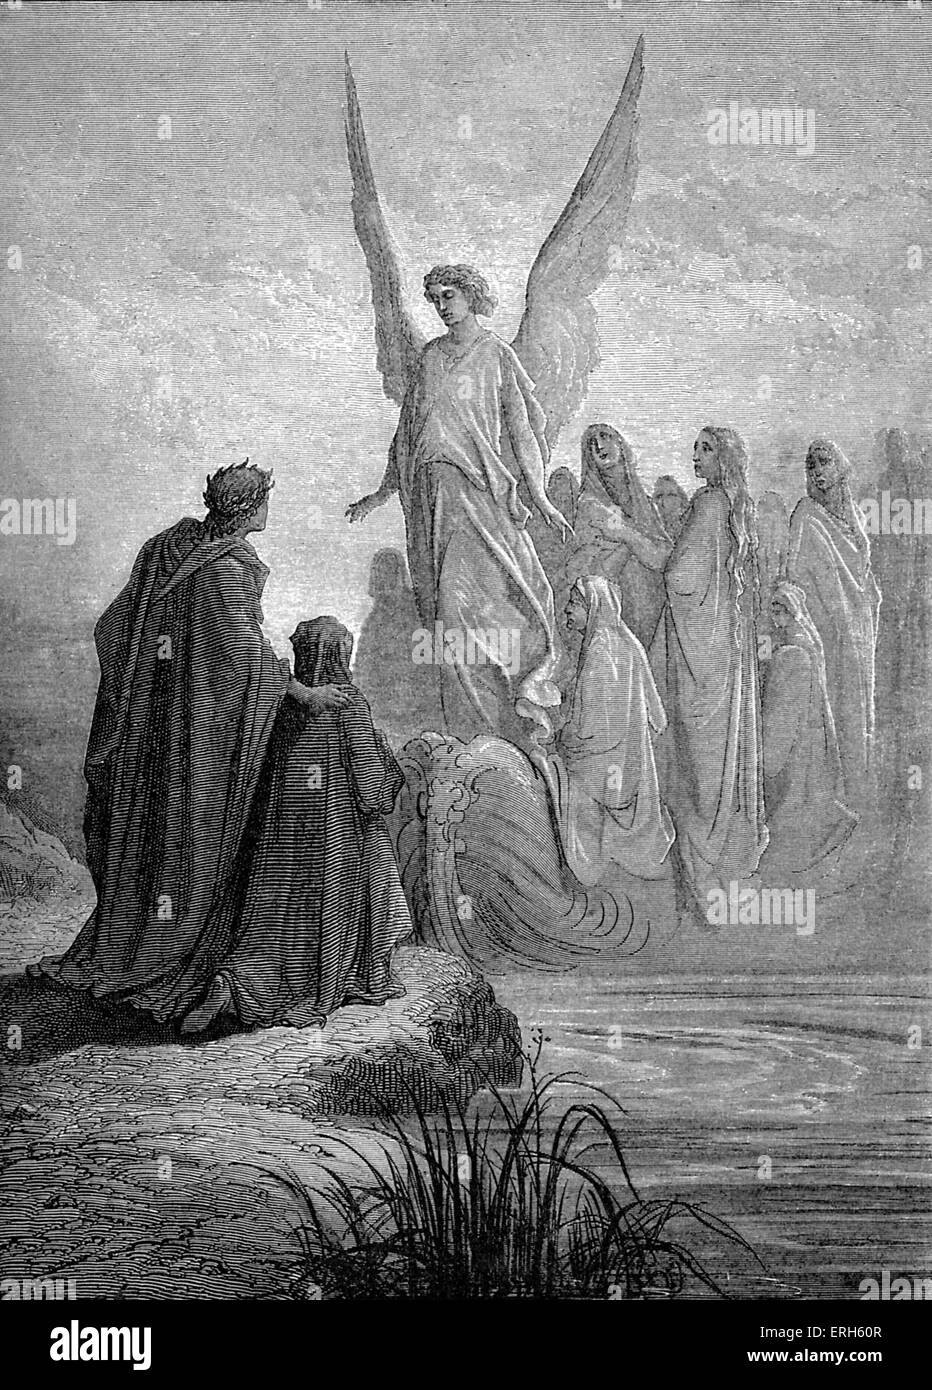 Dante's purgatory, part of his Divine Comedy. Illustration by Gustave Doré. Caption: 'The heavenly at the prow was seen, Visibly written Blessed in his looks.' - Canto II. Dante Alighieri: mid-May to mid-June 1265 - September 13/14, 1321. Stock Photo